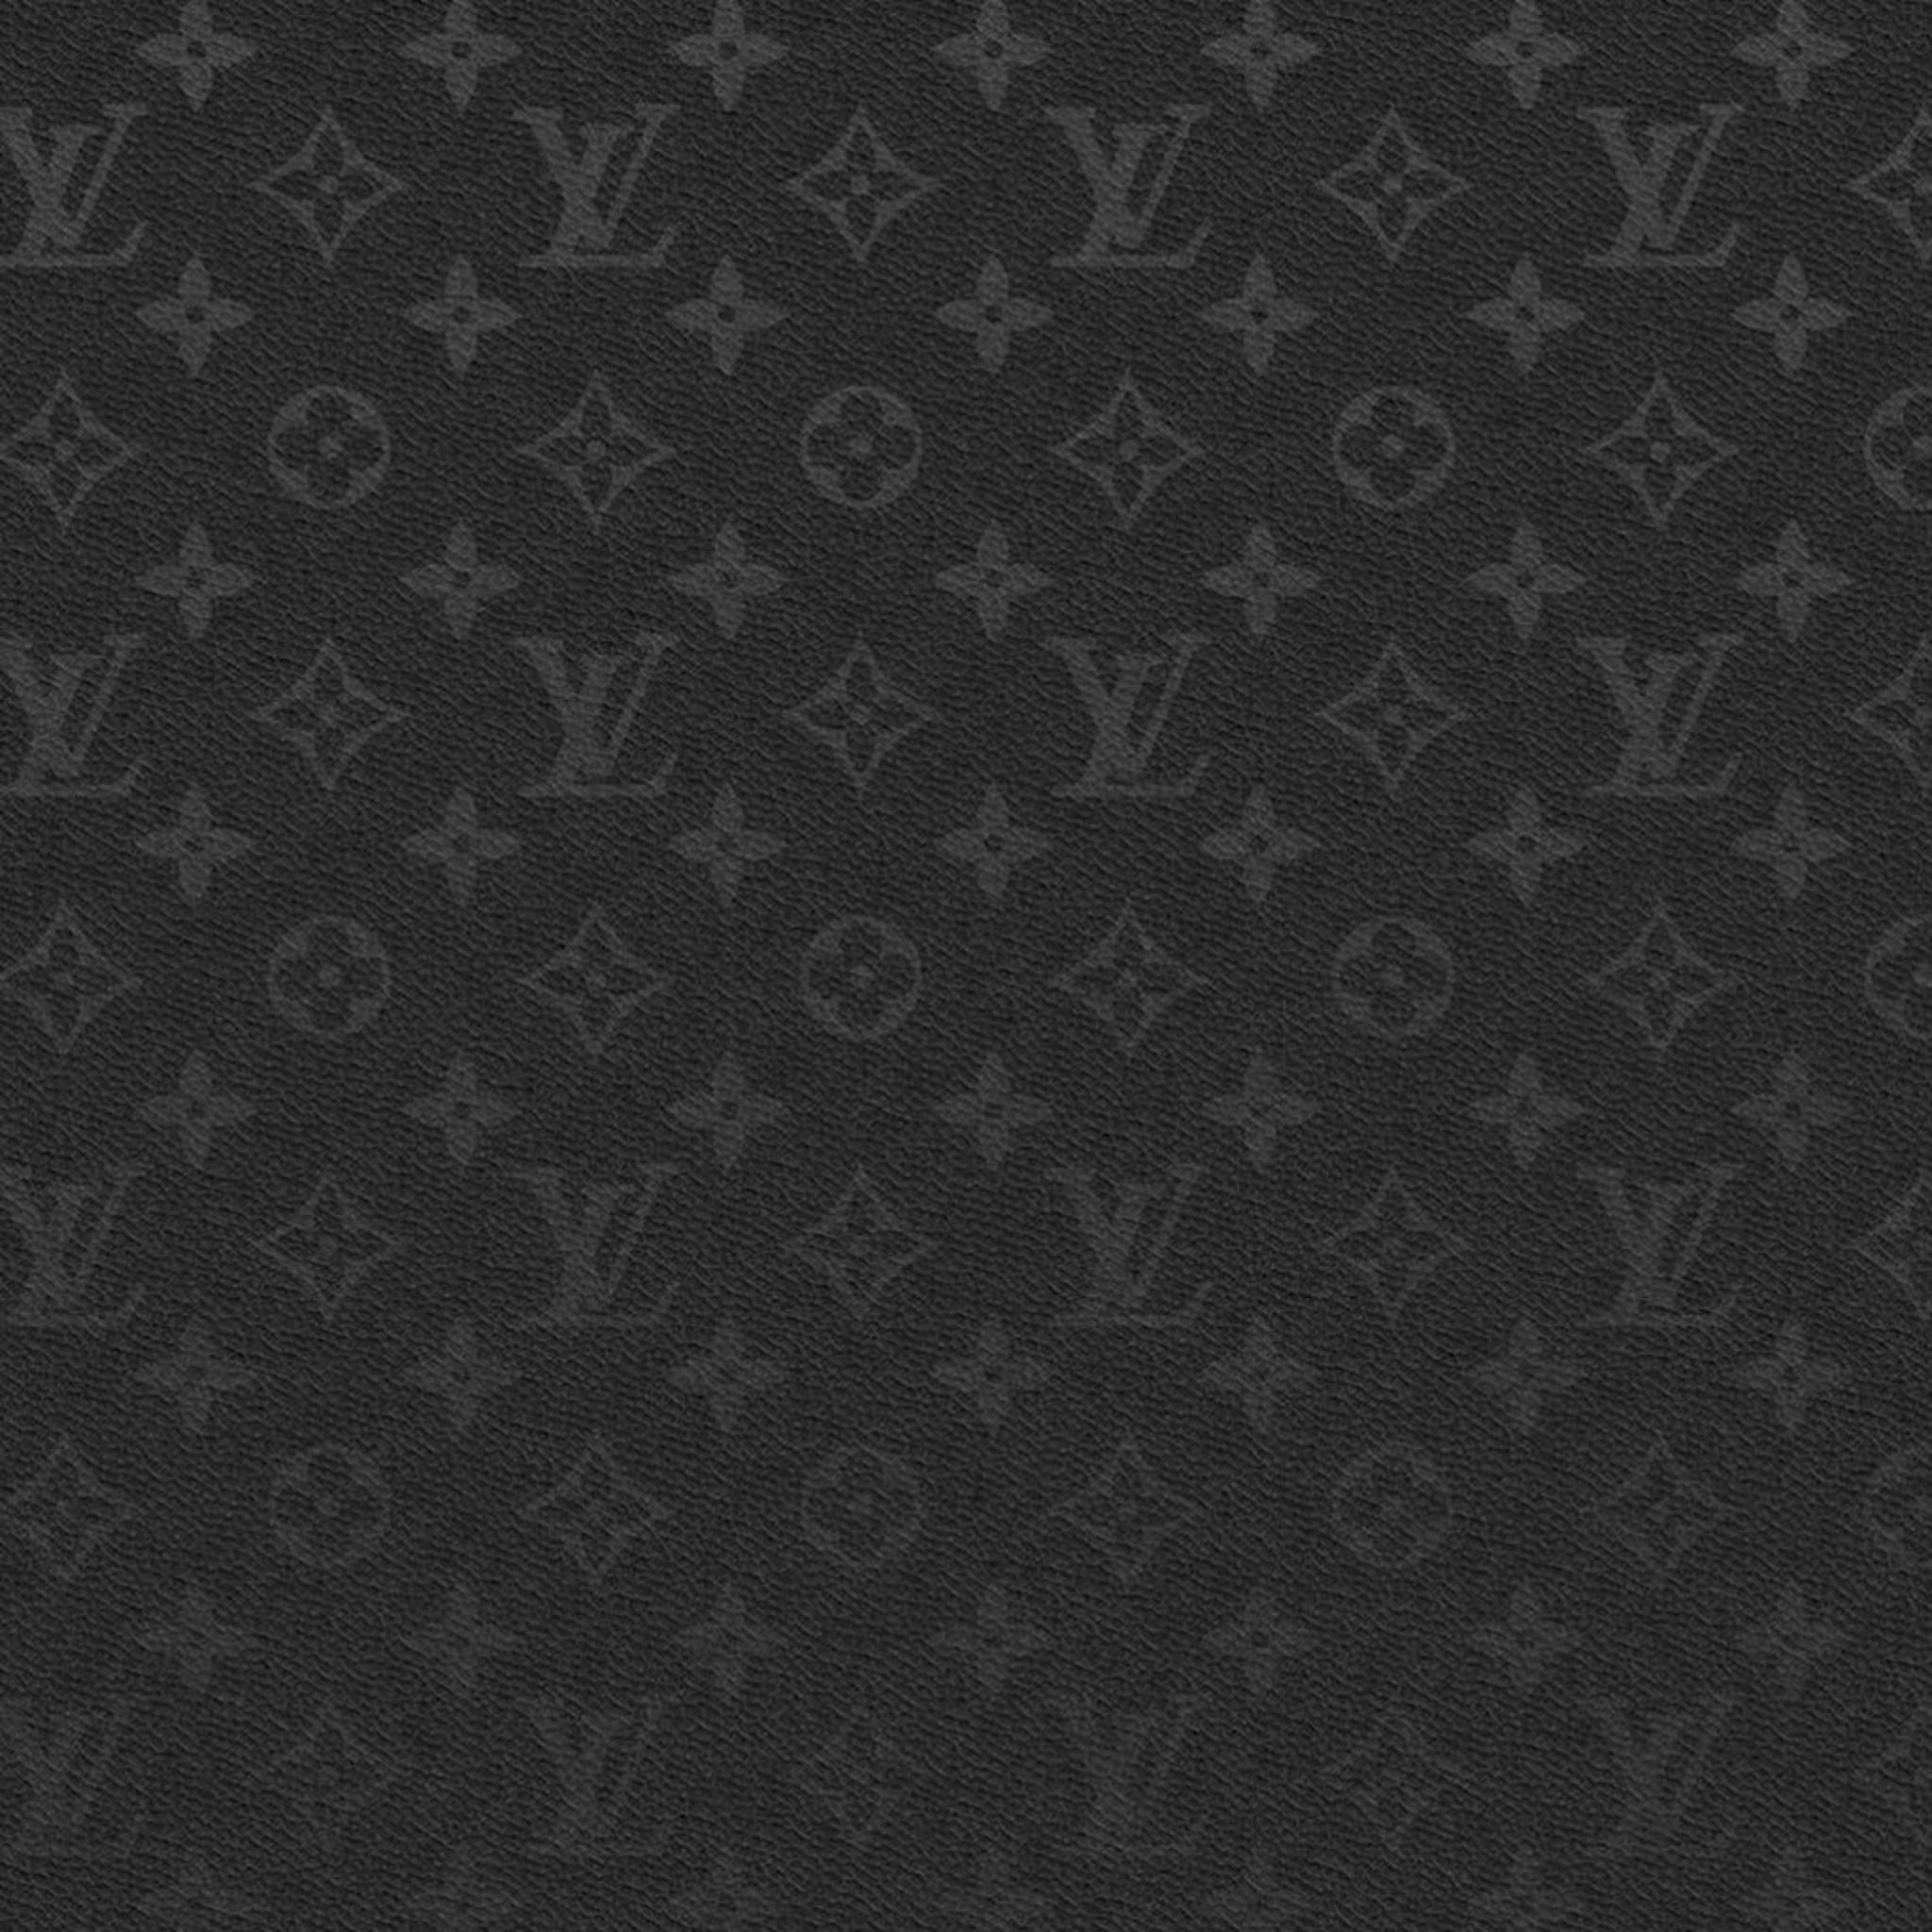 LV Black Wallpapers - Top Free LV Black Backgrounds - WallpaperAccess